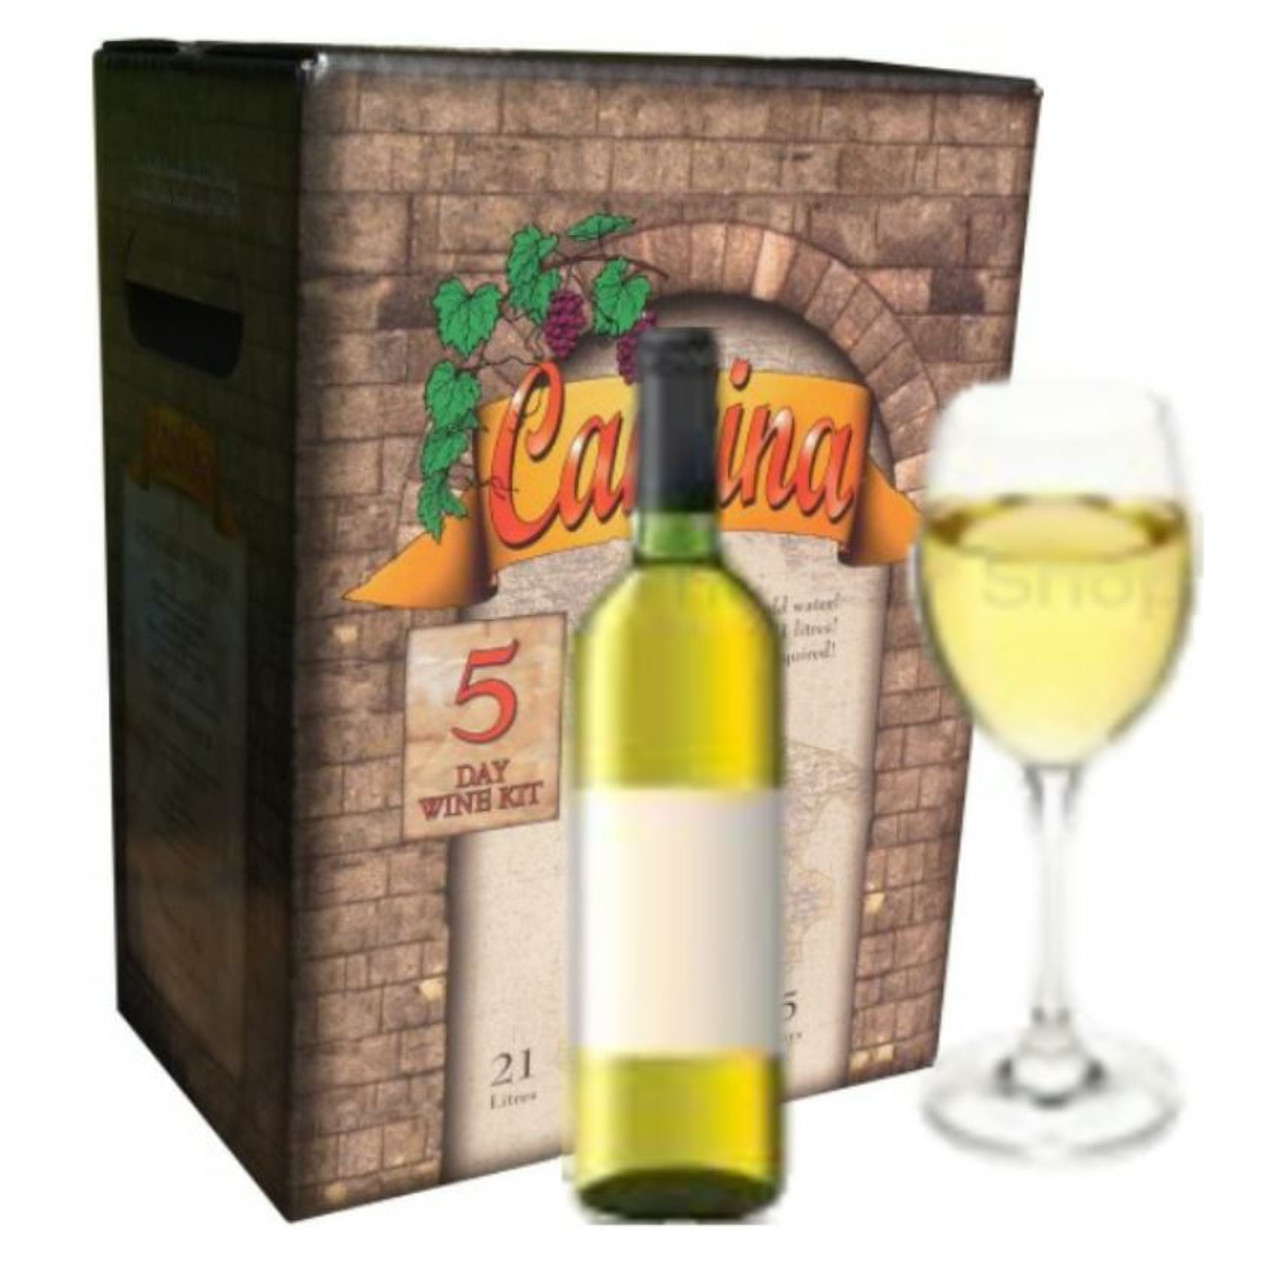 Cantina 5 Day White Wine Kit 21L Homebrew Quality Winemaking No Sugar Required